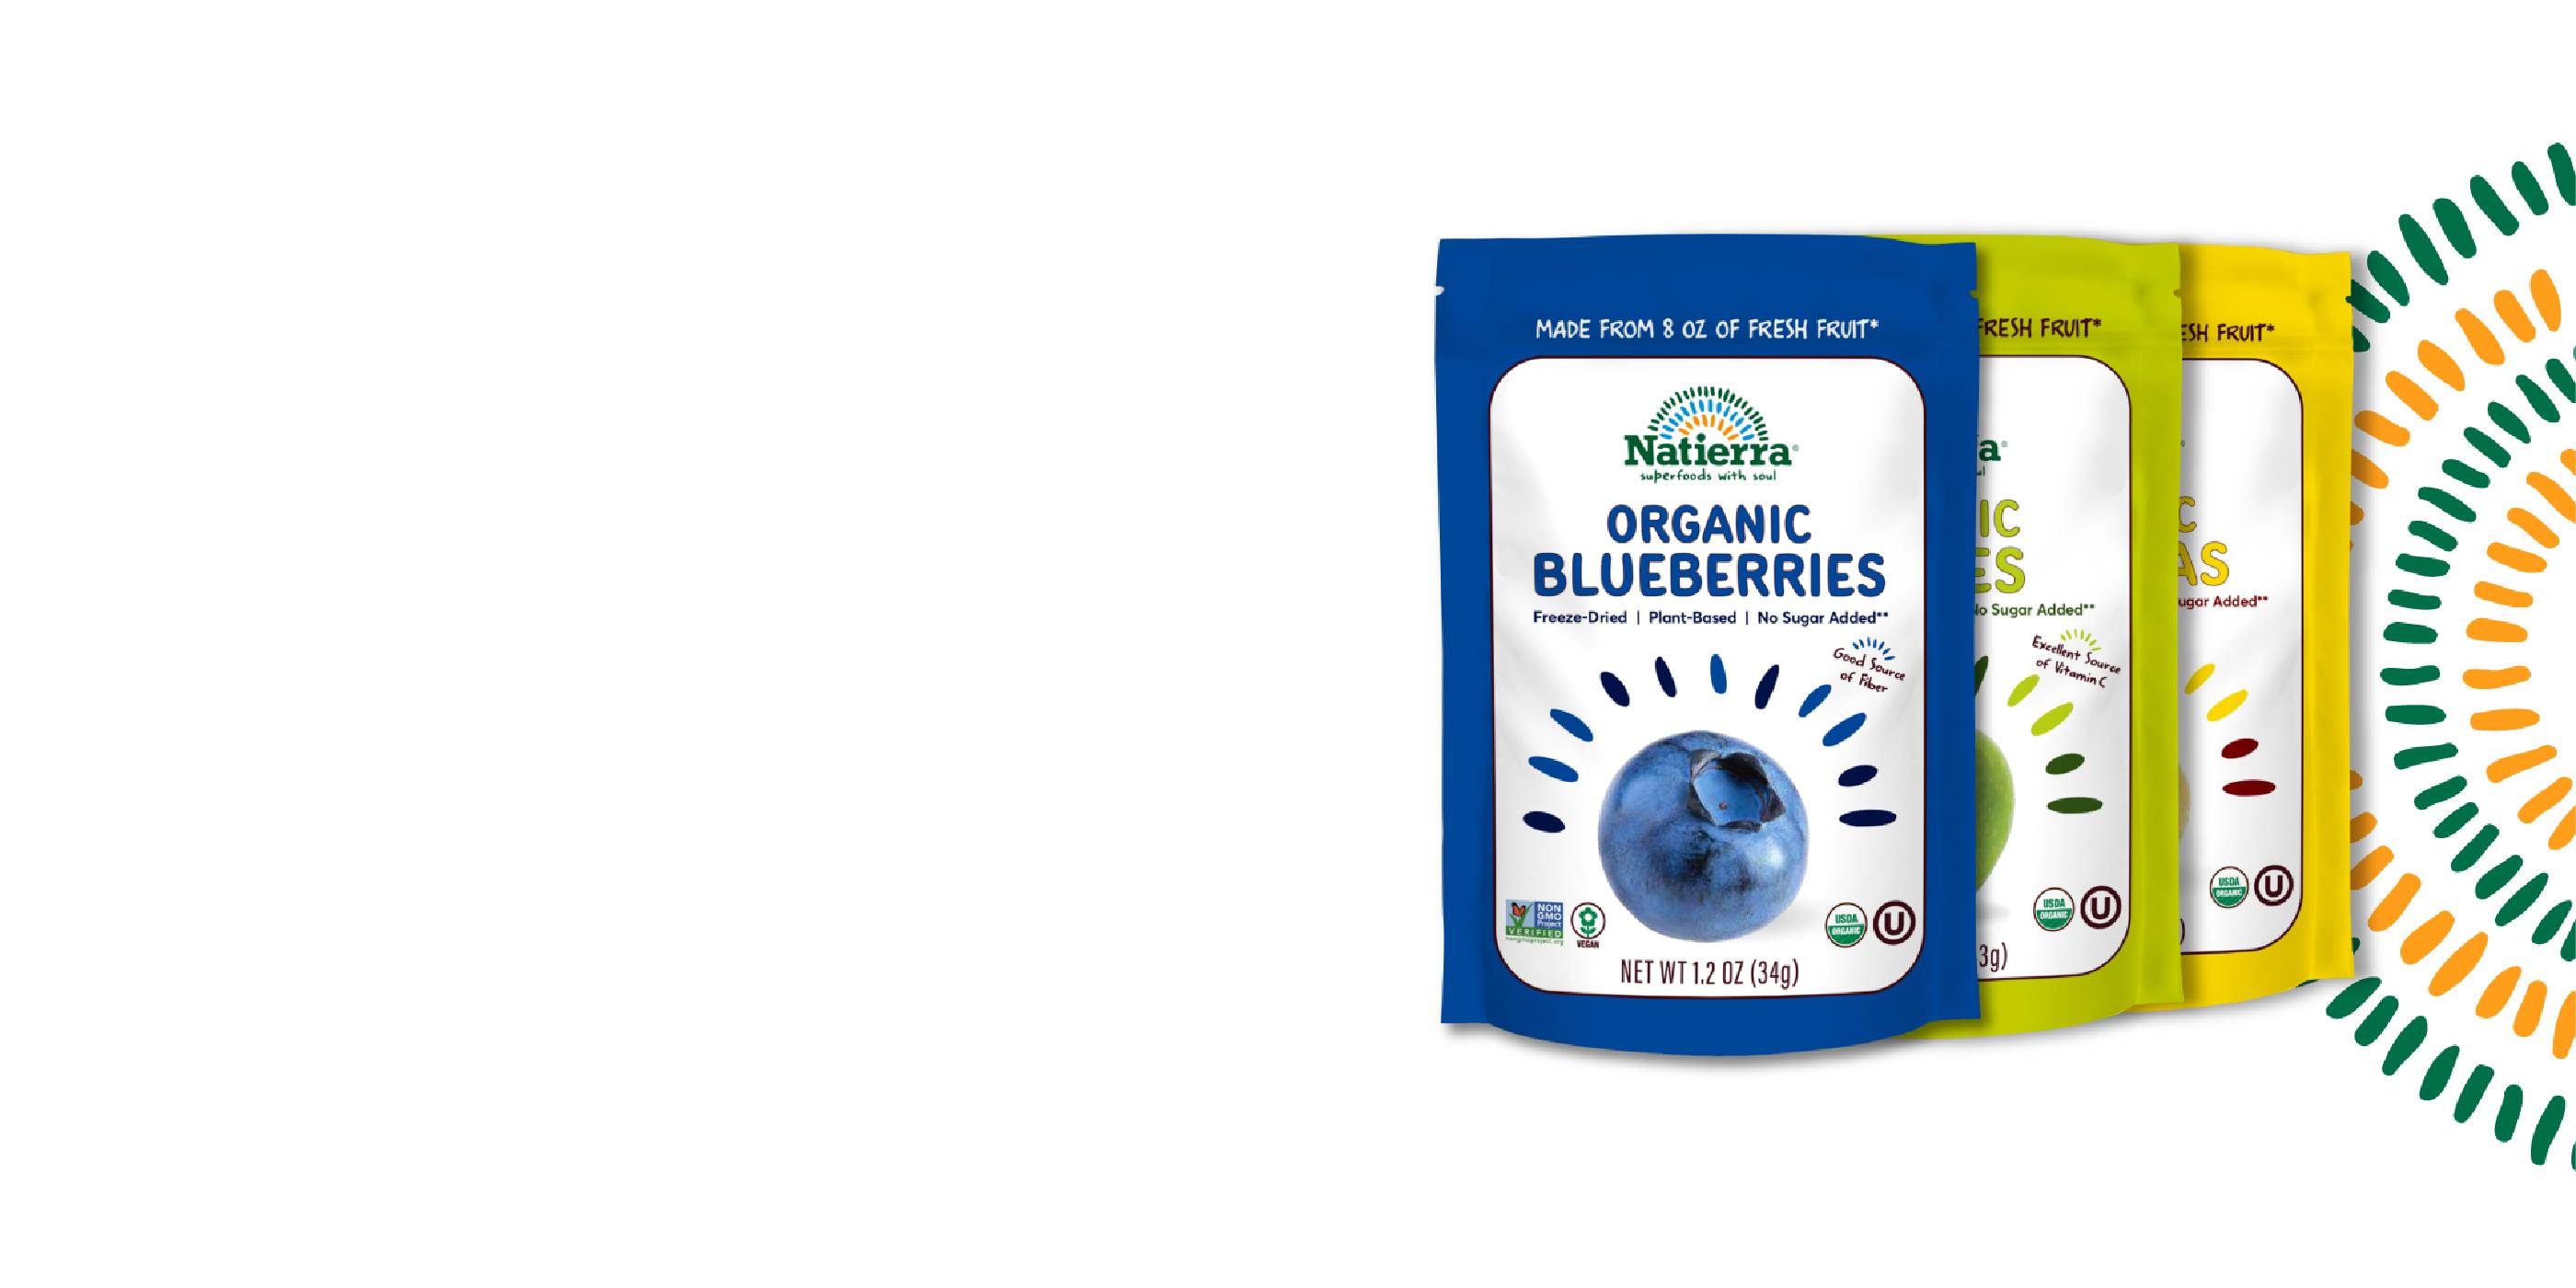 Organic Freeze-Dried Blueberries on top of Organic Freeze Dried Apples on top of Organic Bananas packaging